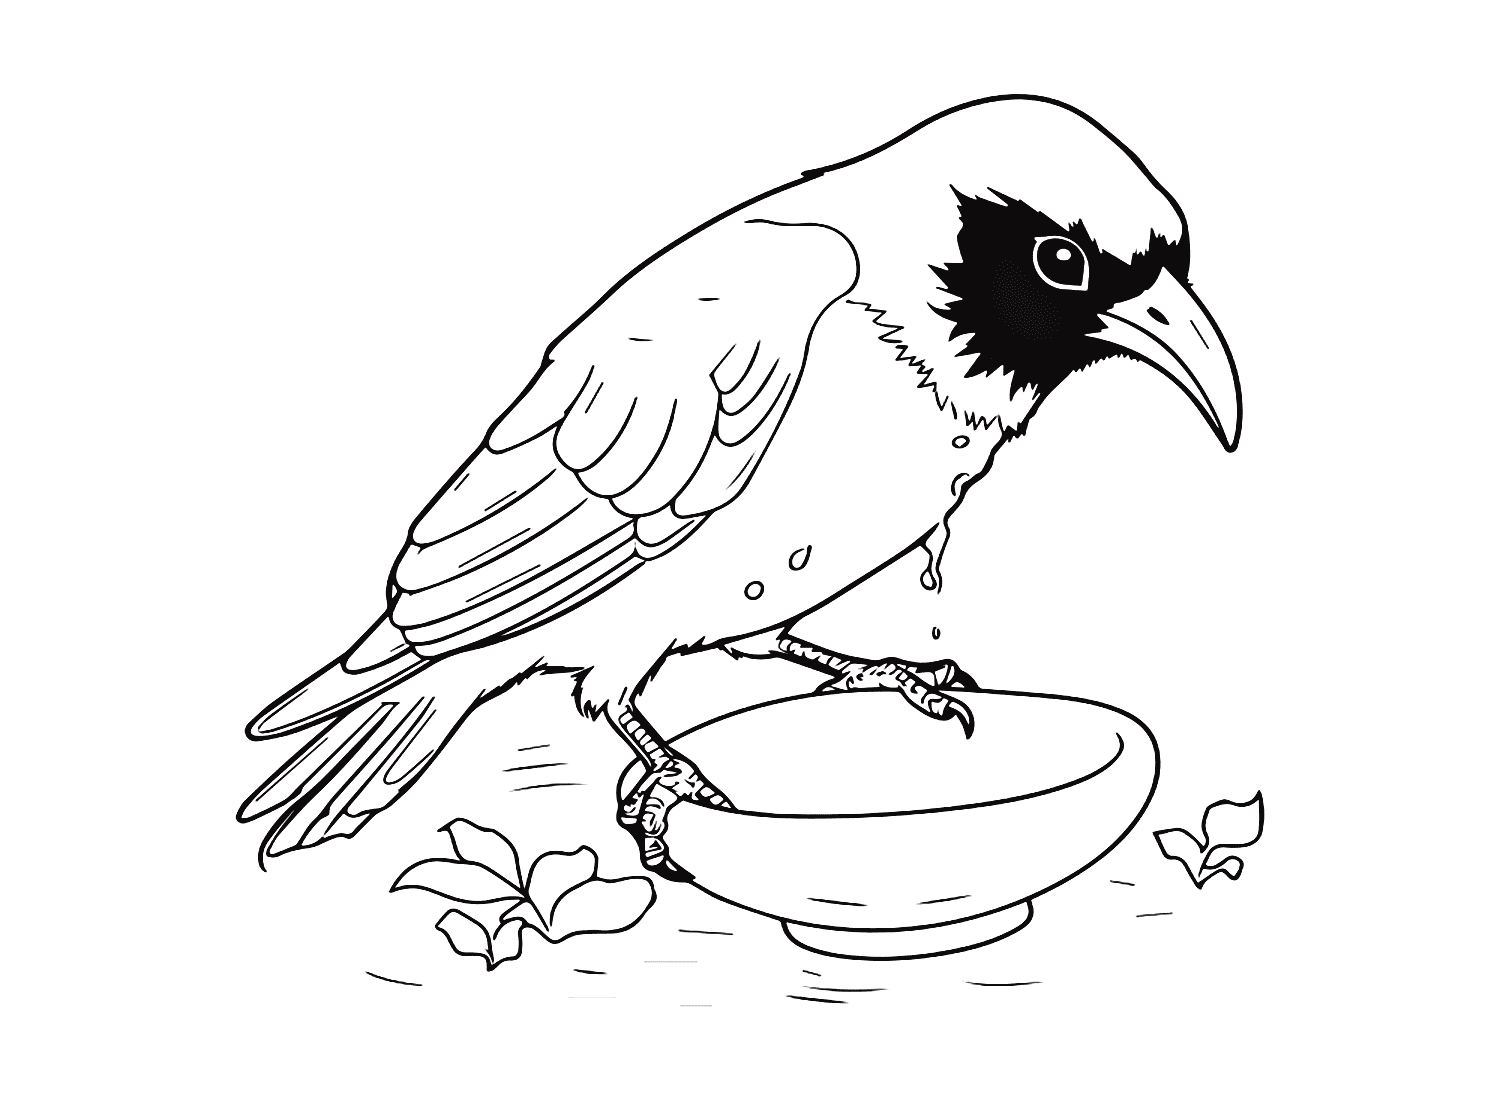 Crow Coloring Pages - Coloring Pages For Kids And Adults